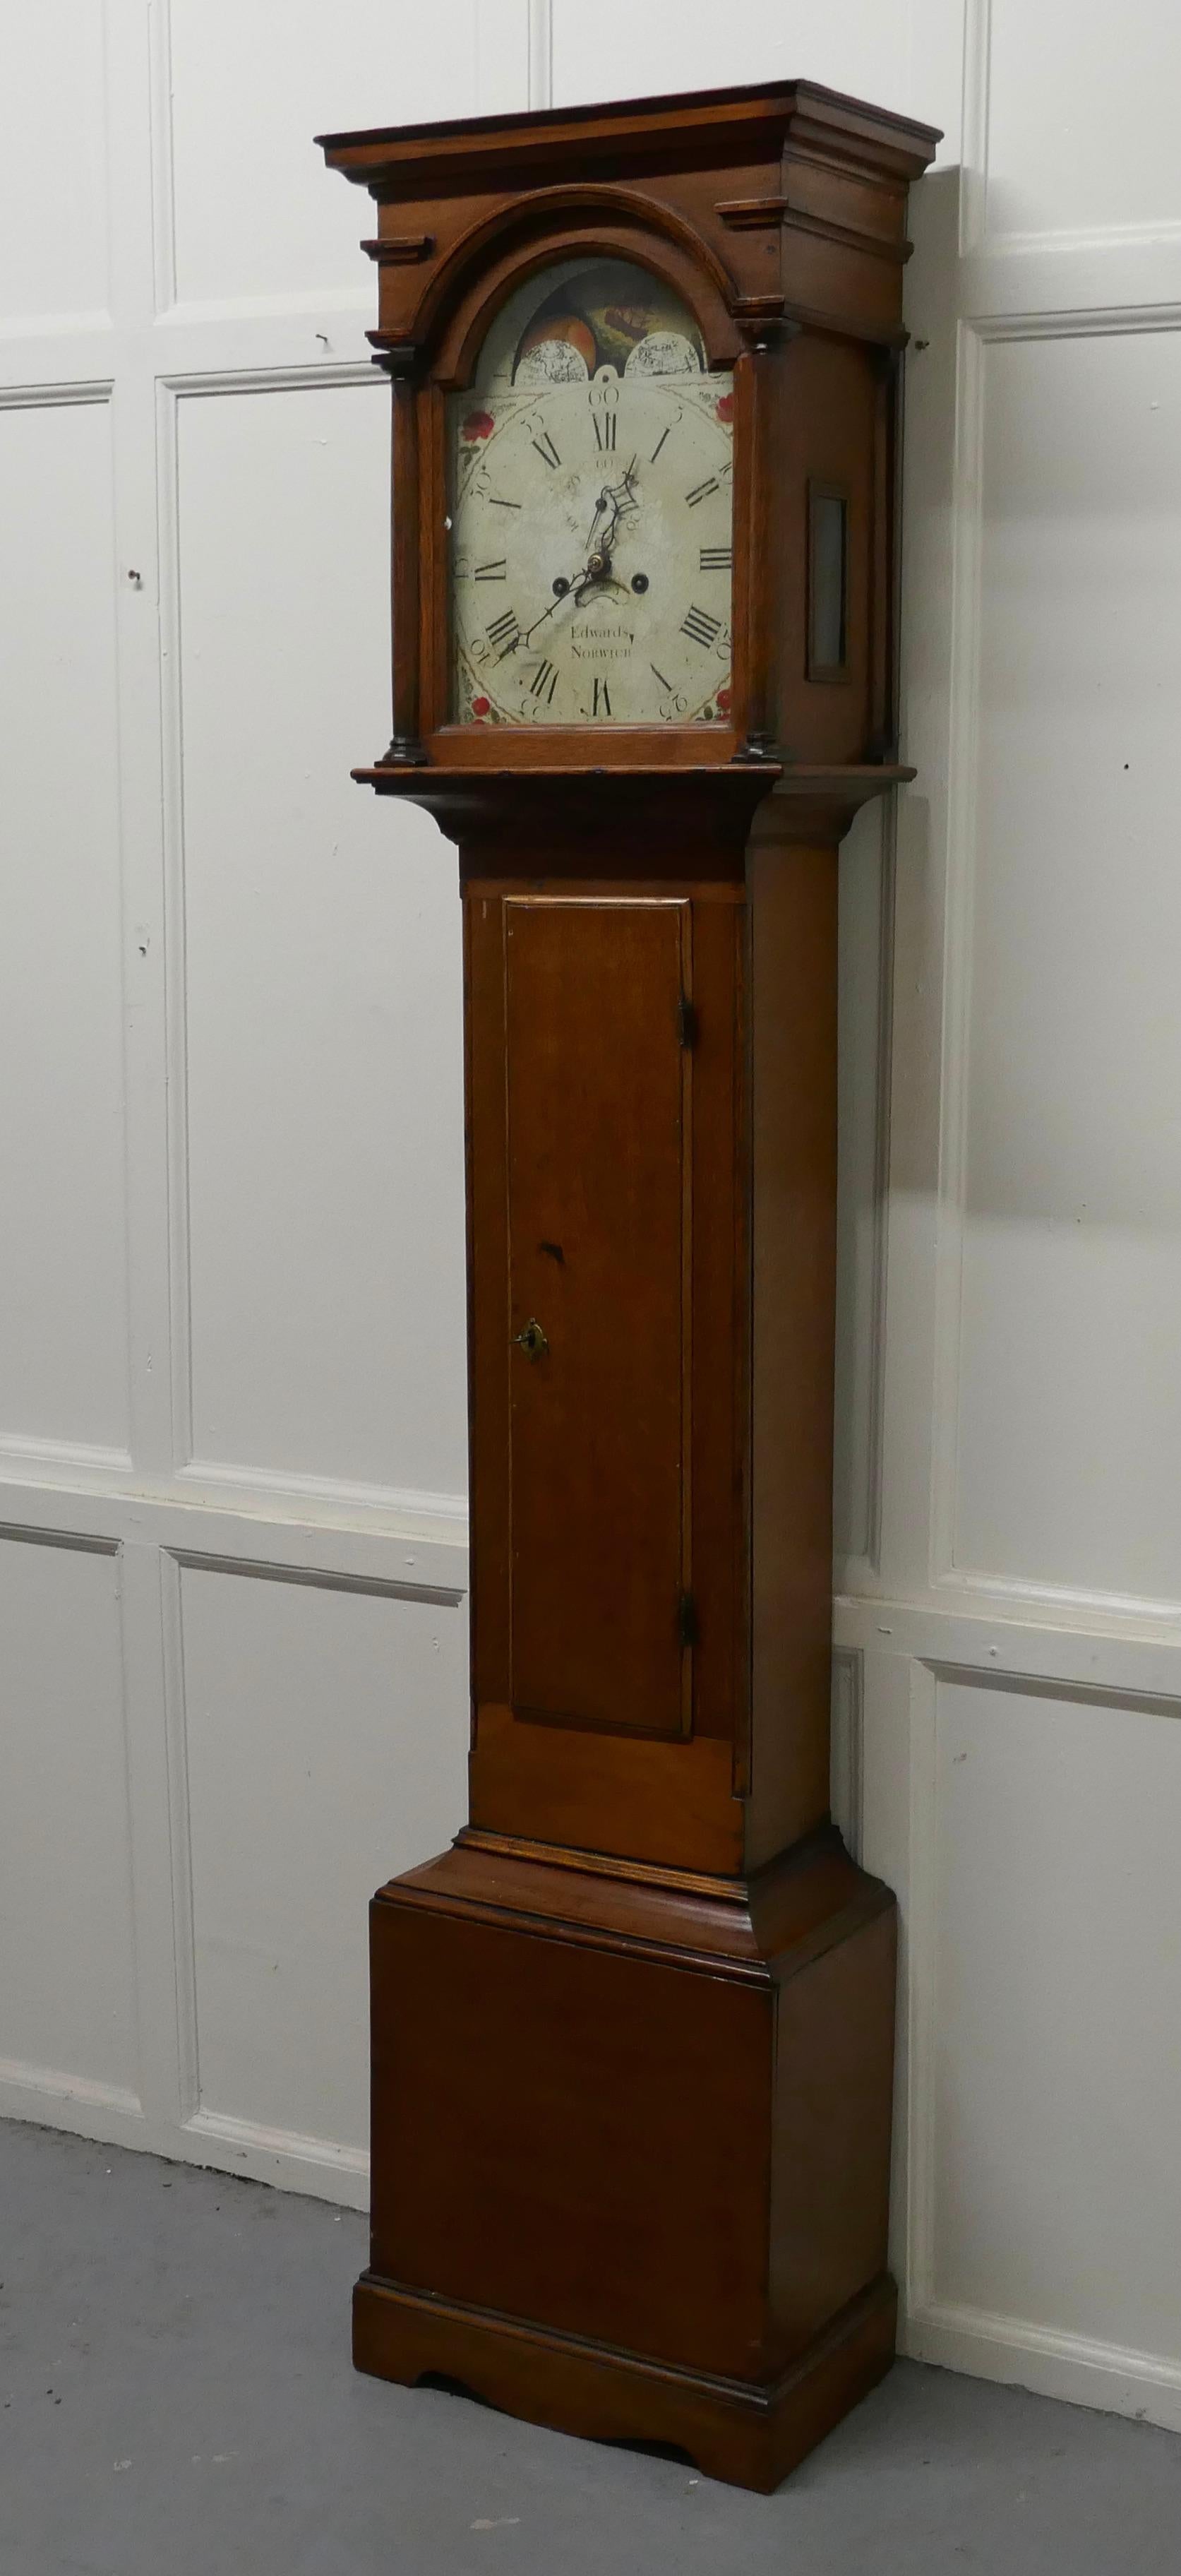 George III Country oak long case clock by John Edwards of Norwich 

18th century Country oak clock with a painted enamel face, Arch Dial Rolling Moon phase with a separate seconds dial and date display by John Edwards of Norwich
 
Eight day